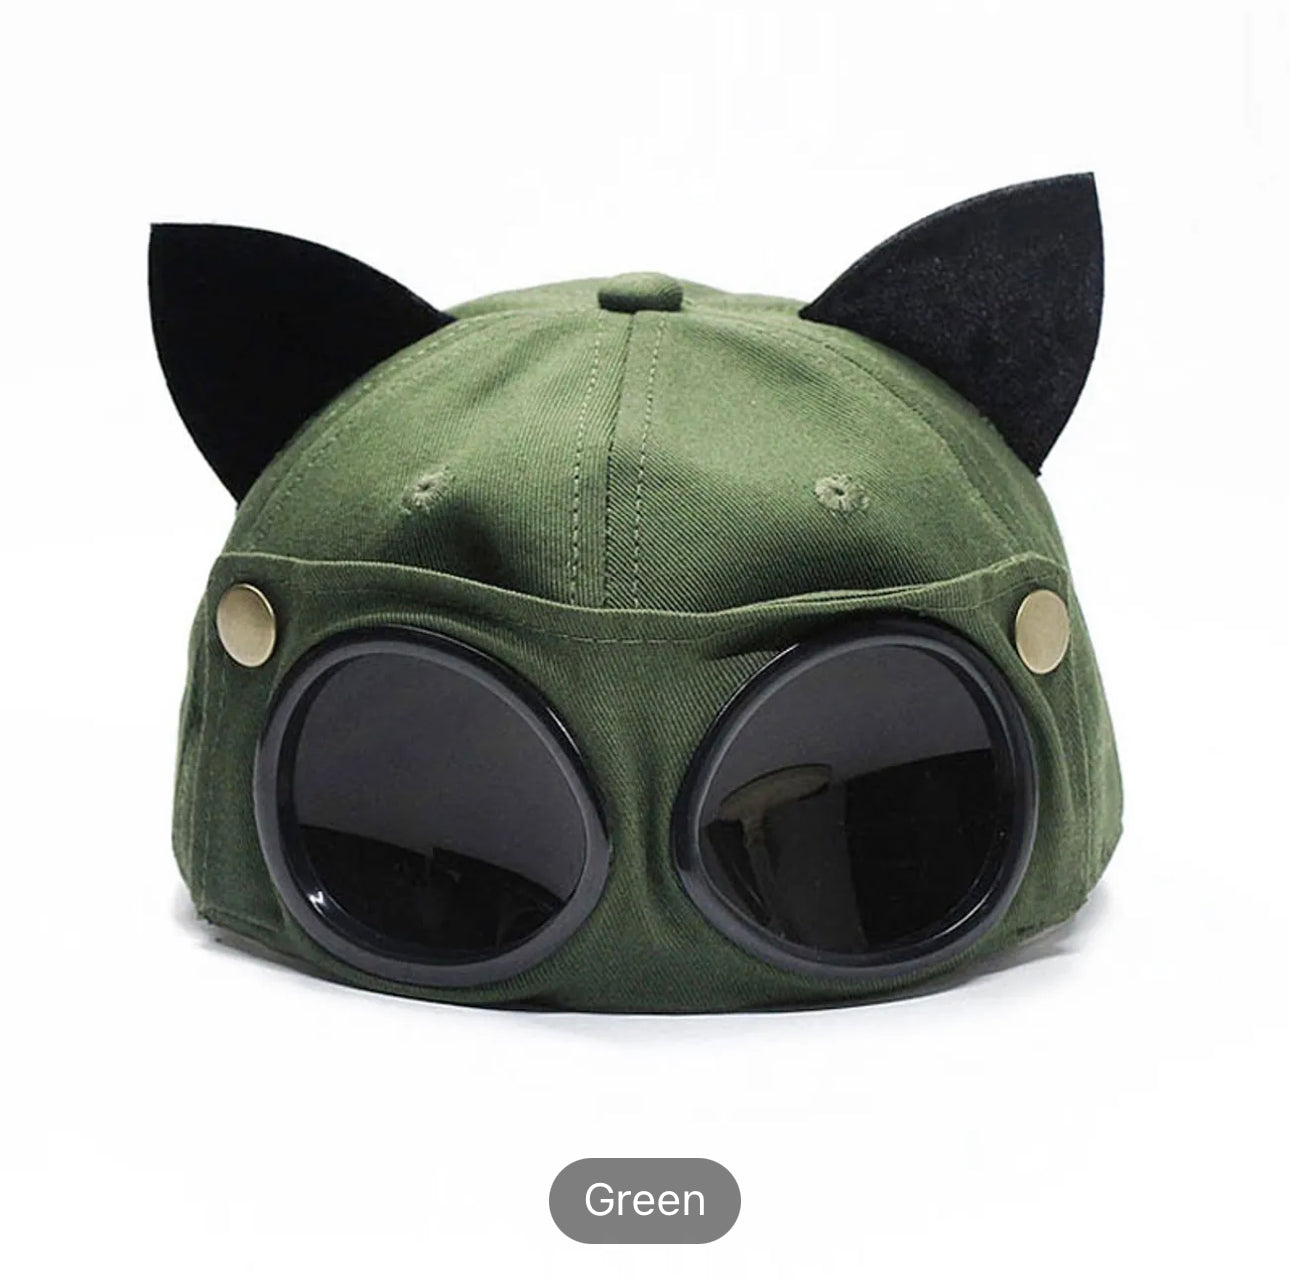 Unlock Your Inner Cat with this Adorable Cat Ears Aviator Glasses Baseball Cap!